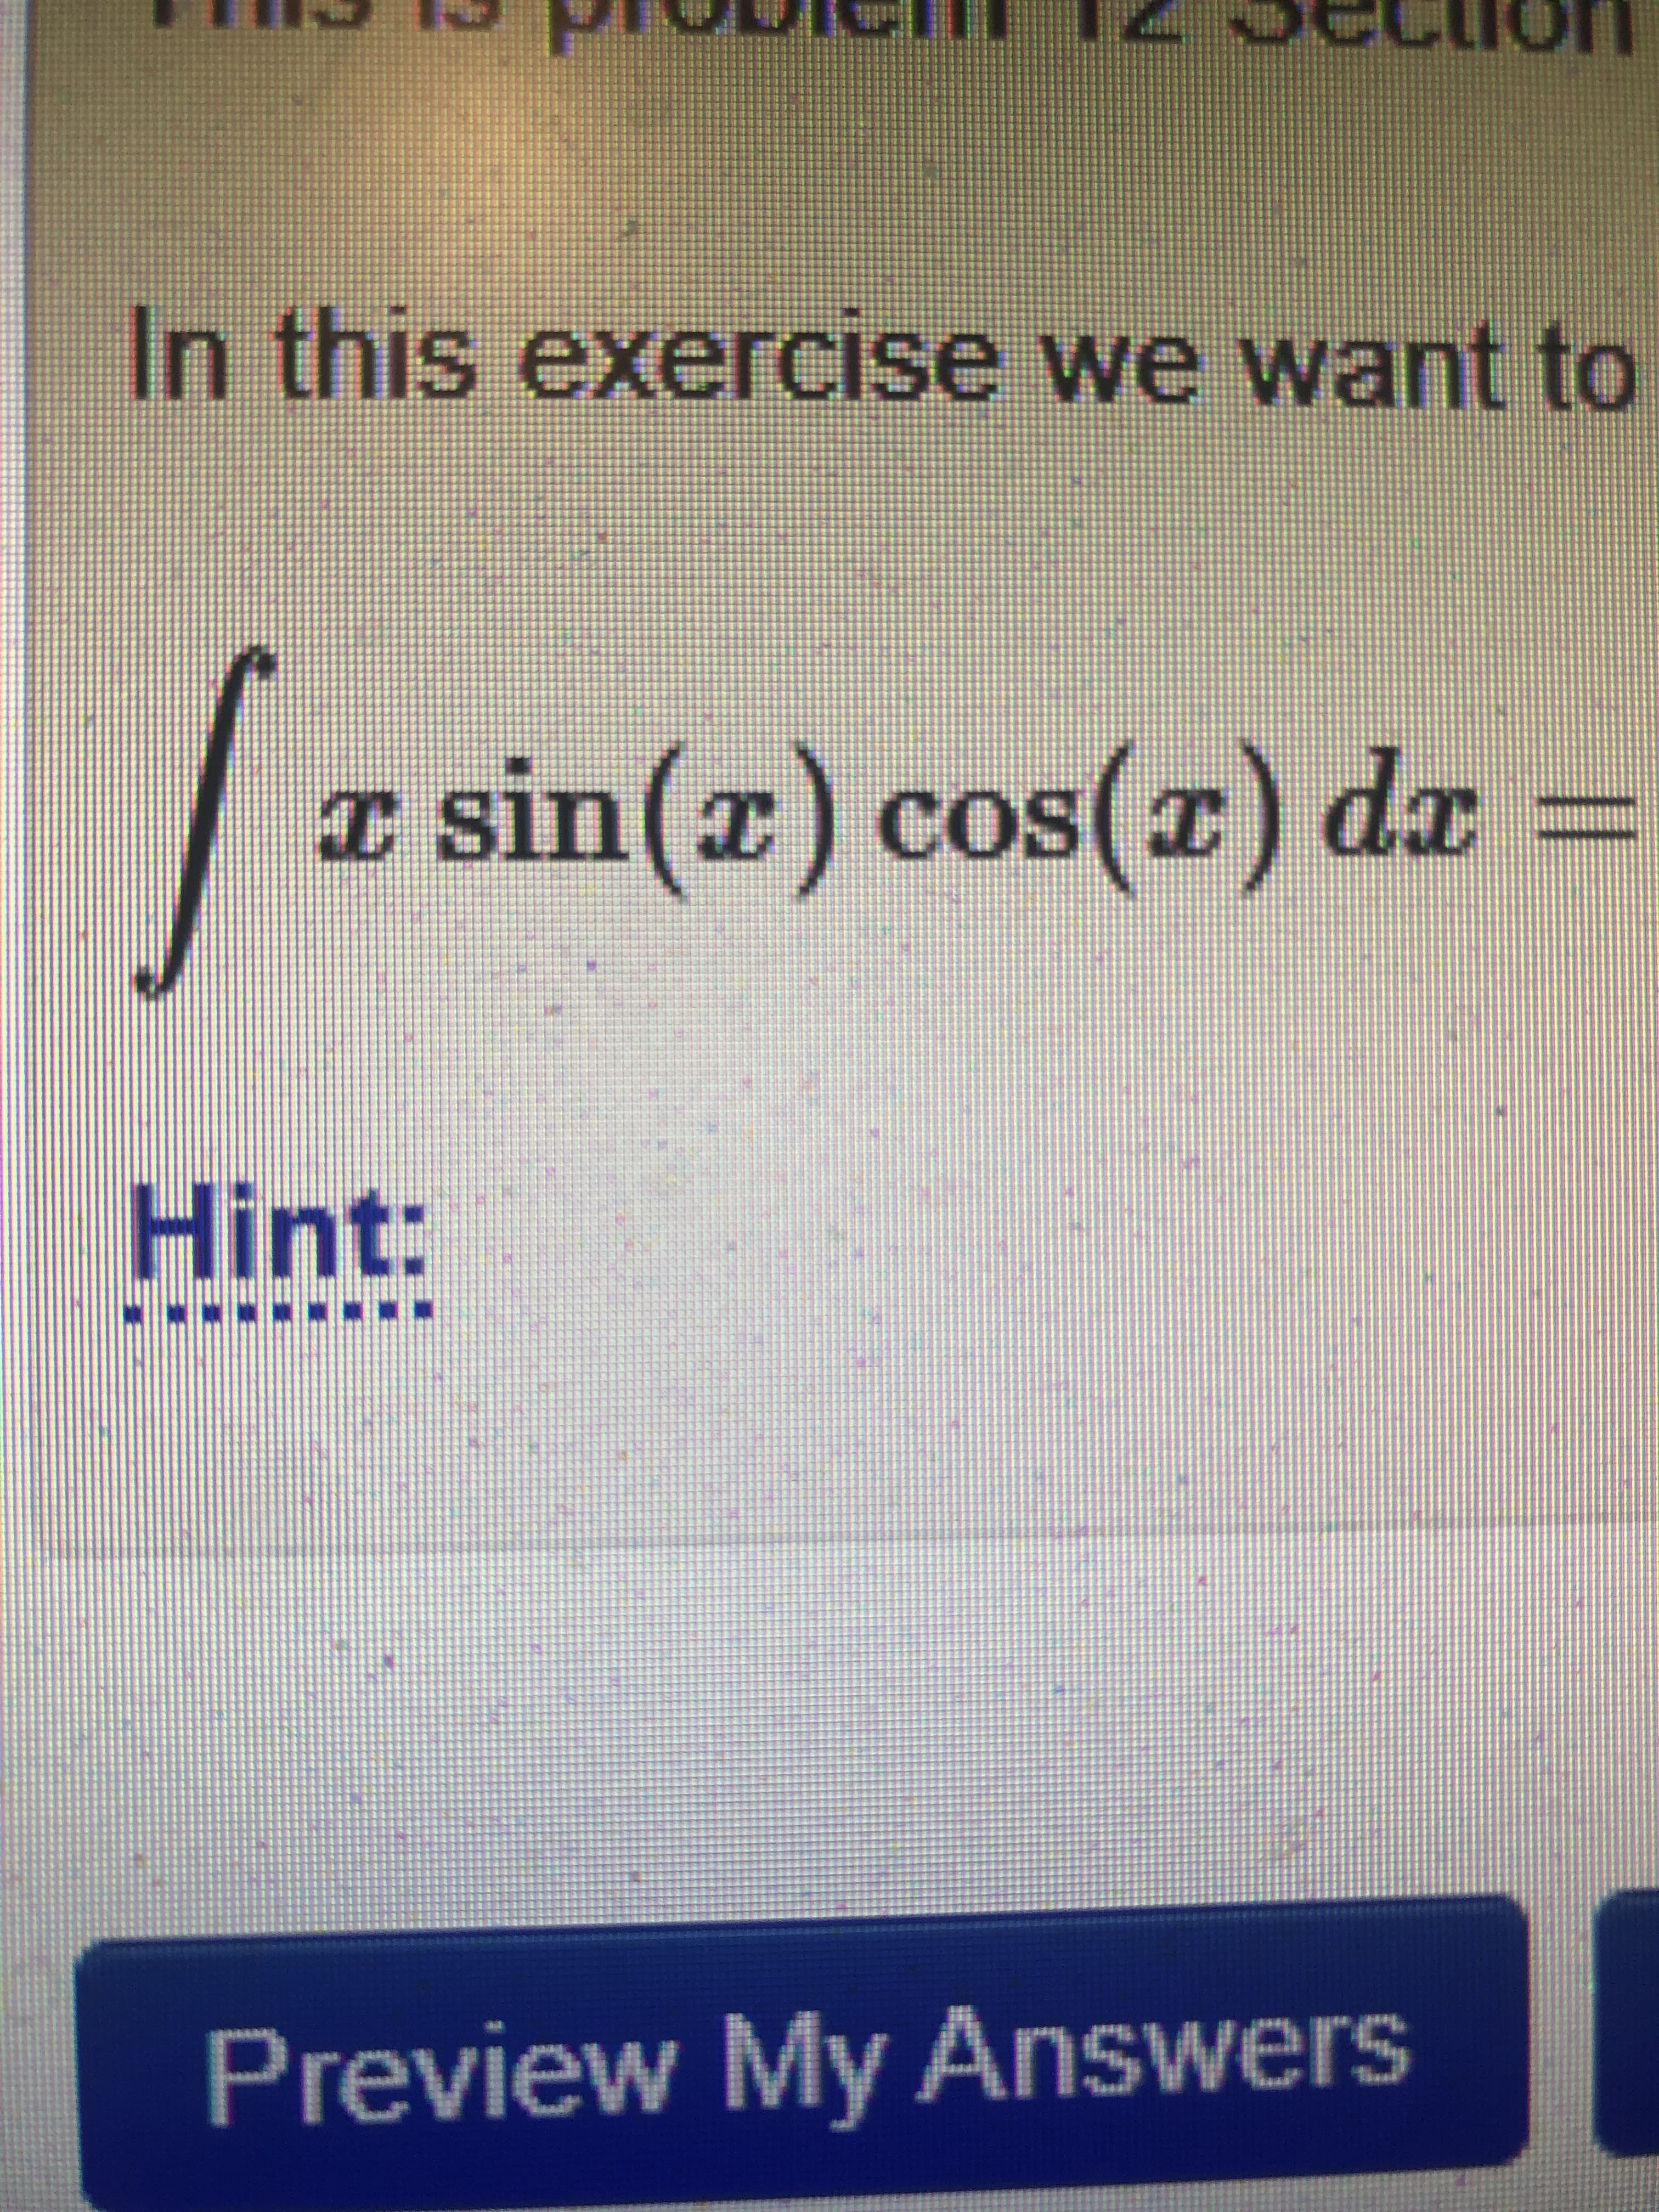 %3D
In this exercise we want to
r sin(z) cos(z) dx
I)SO ( UIS I
Hint:
Preview My Answers
